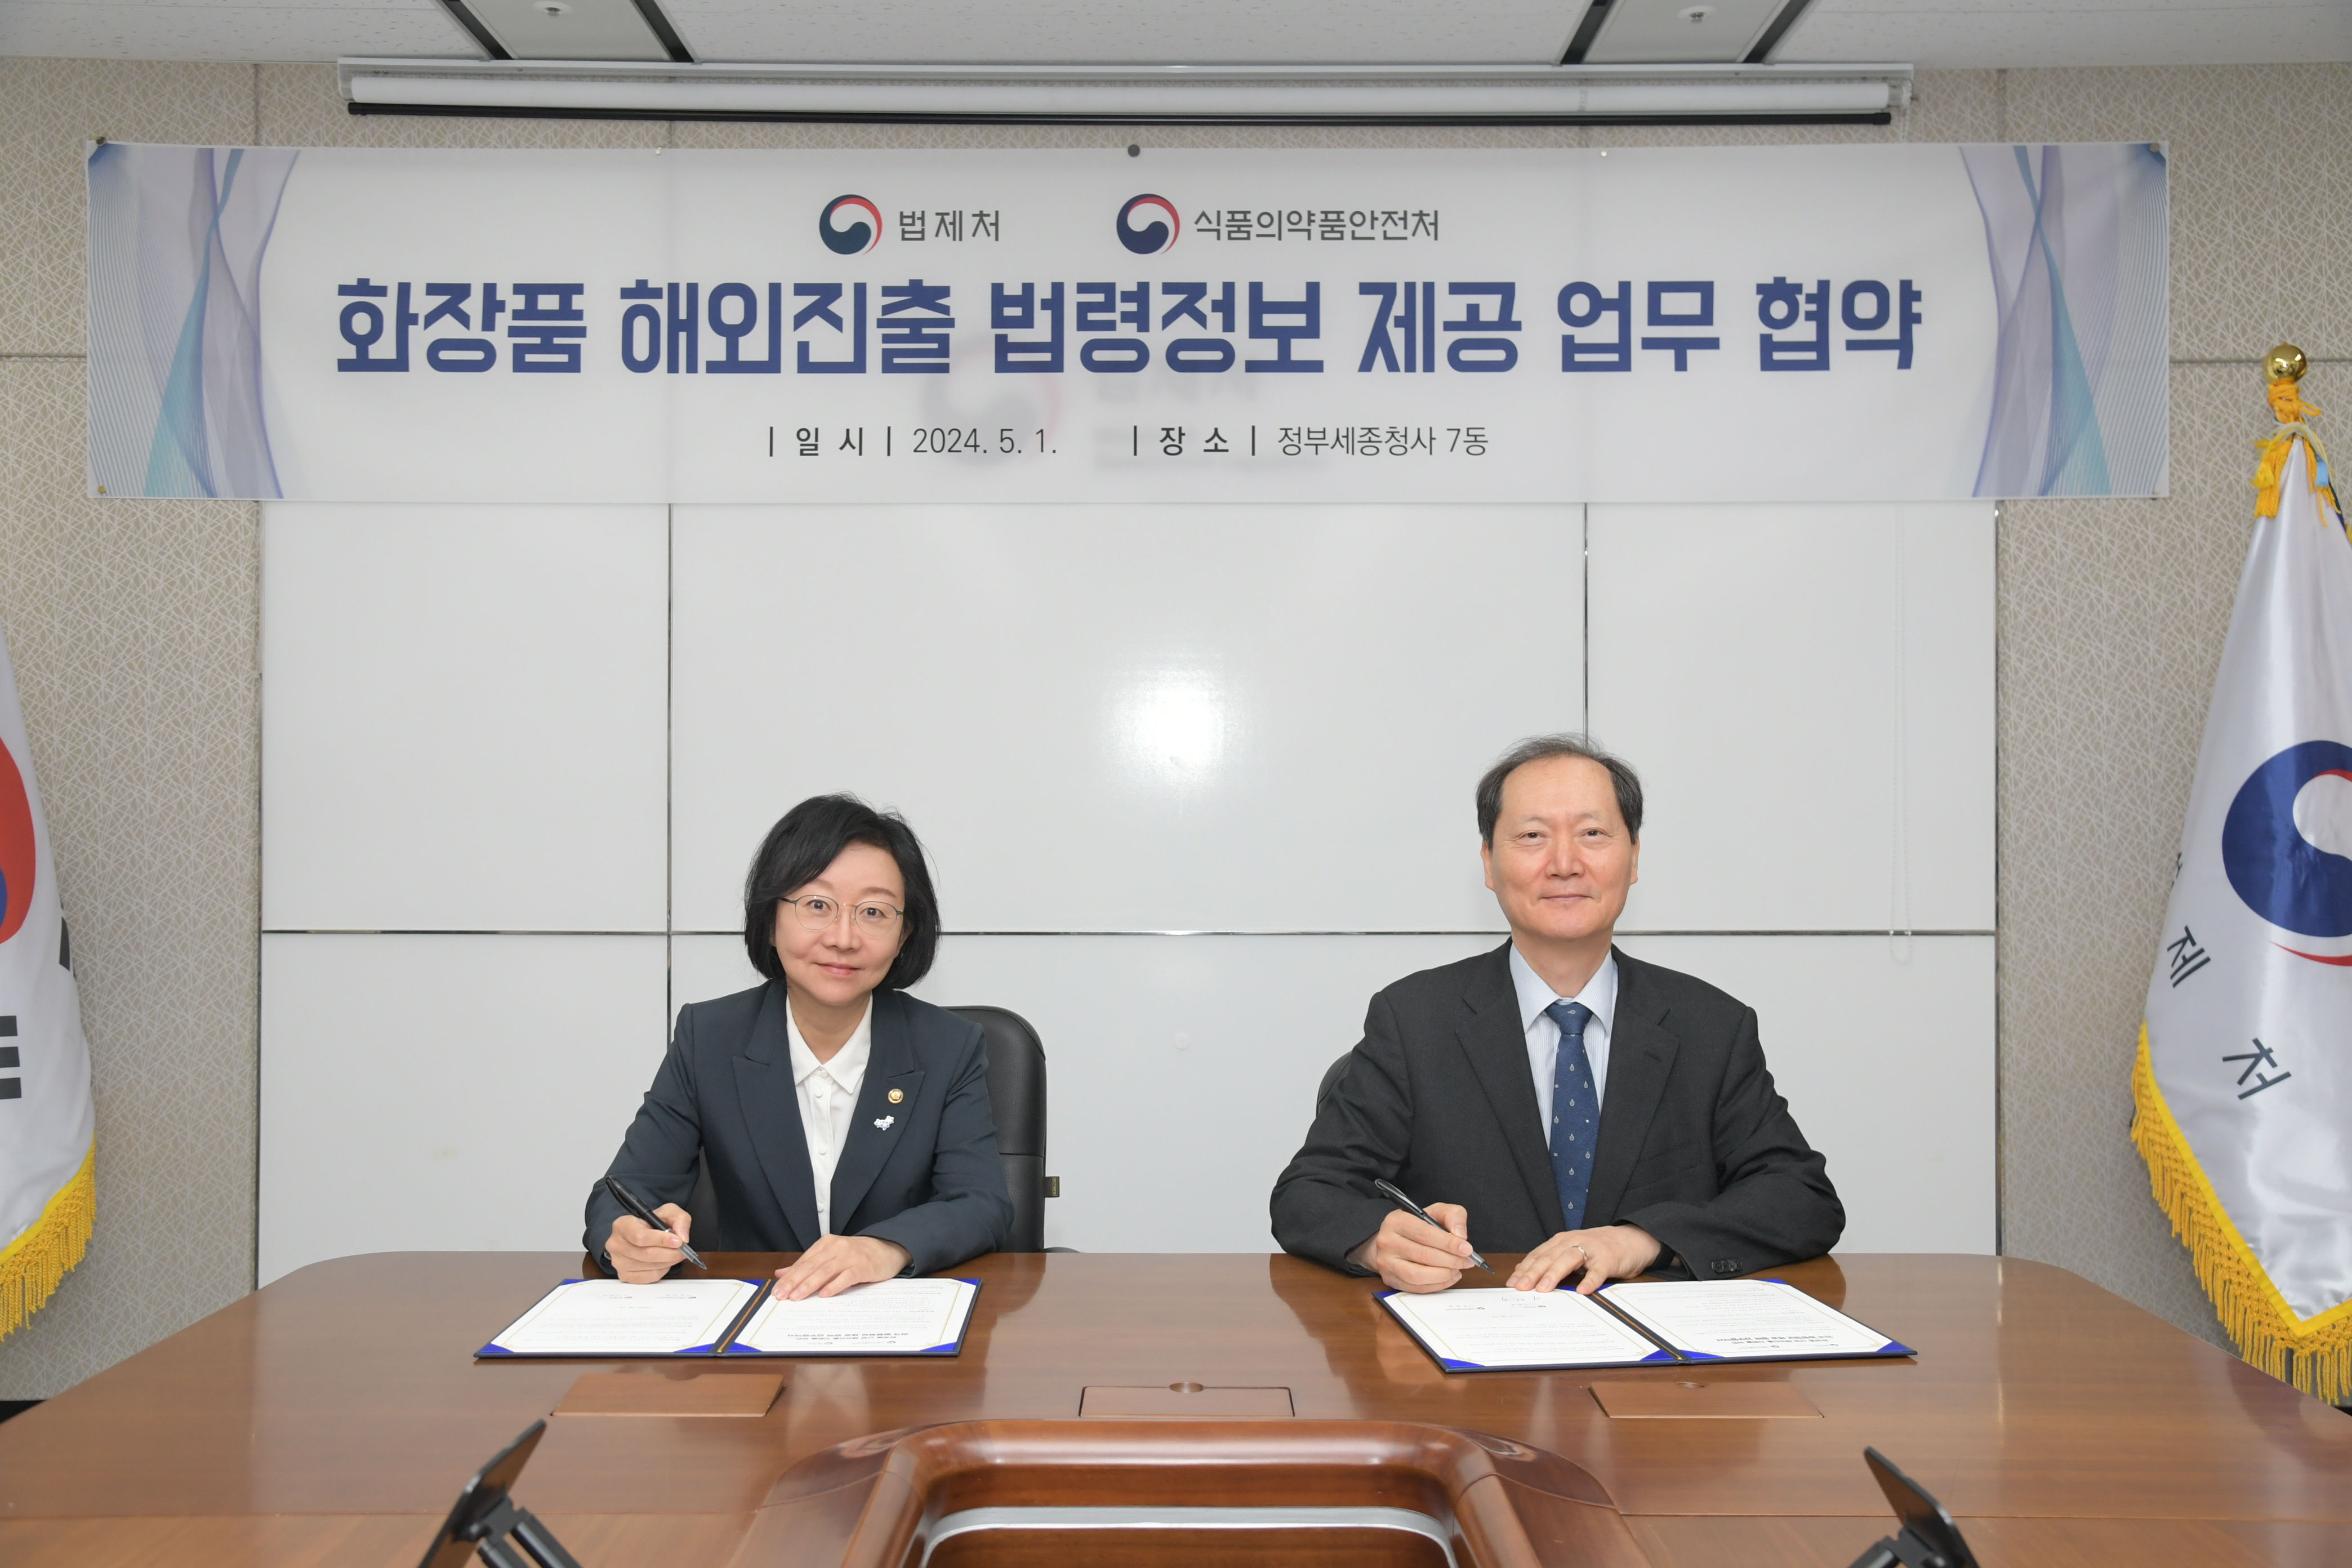 Photo News3 - Ministry of Food and Drug Safety and Ministry of Government Legislation, signing ceremony for ‘Agreement to provide legal information for overseas expansion of cosmetics’